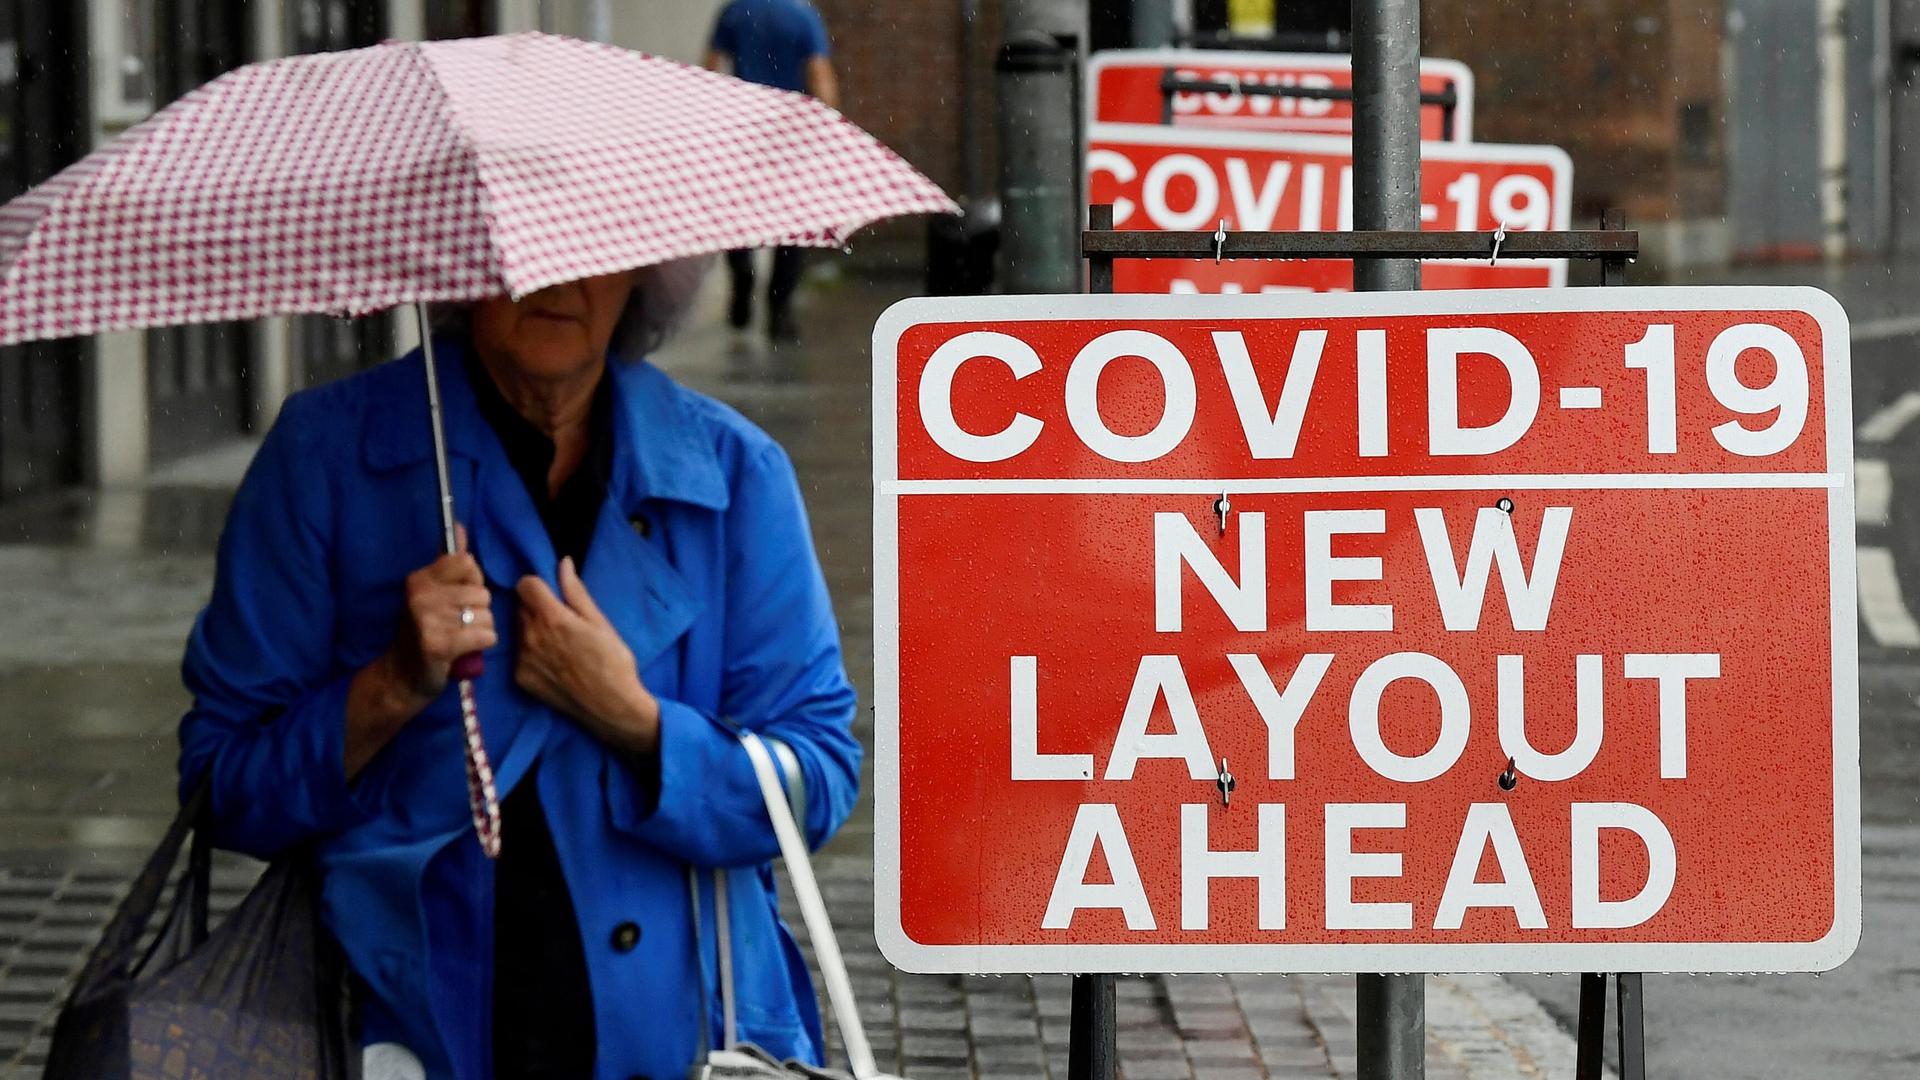 A woman holds shopping bags and an umbrella next to bright red sign with white text about COVID-19